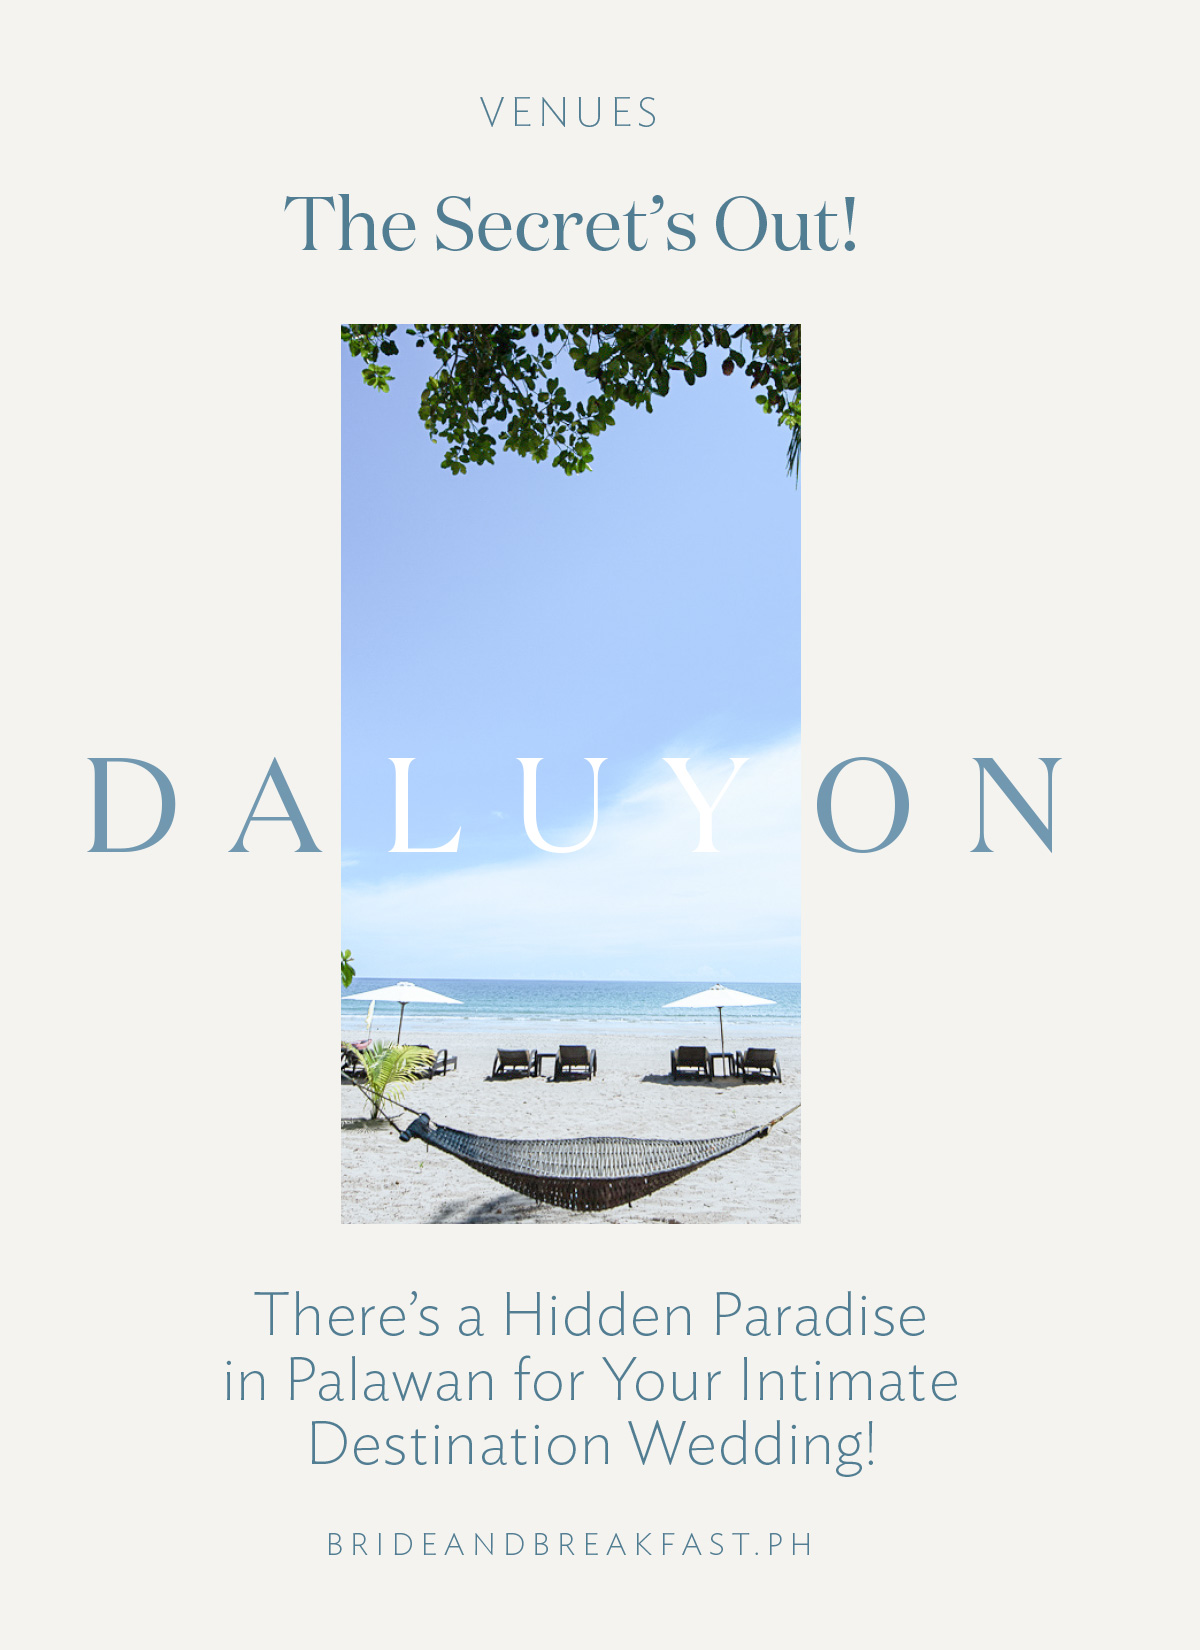 The Secret’s Out! There’s a Hidden Paradise in Palawan for Your Intimate Destination Wedding!